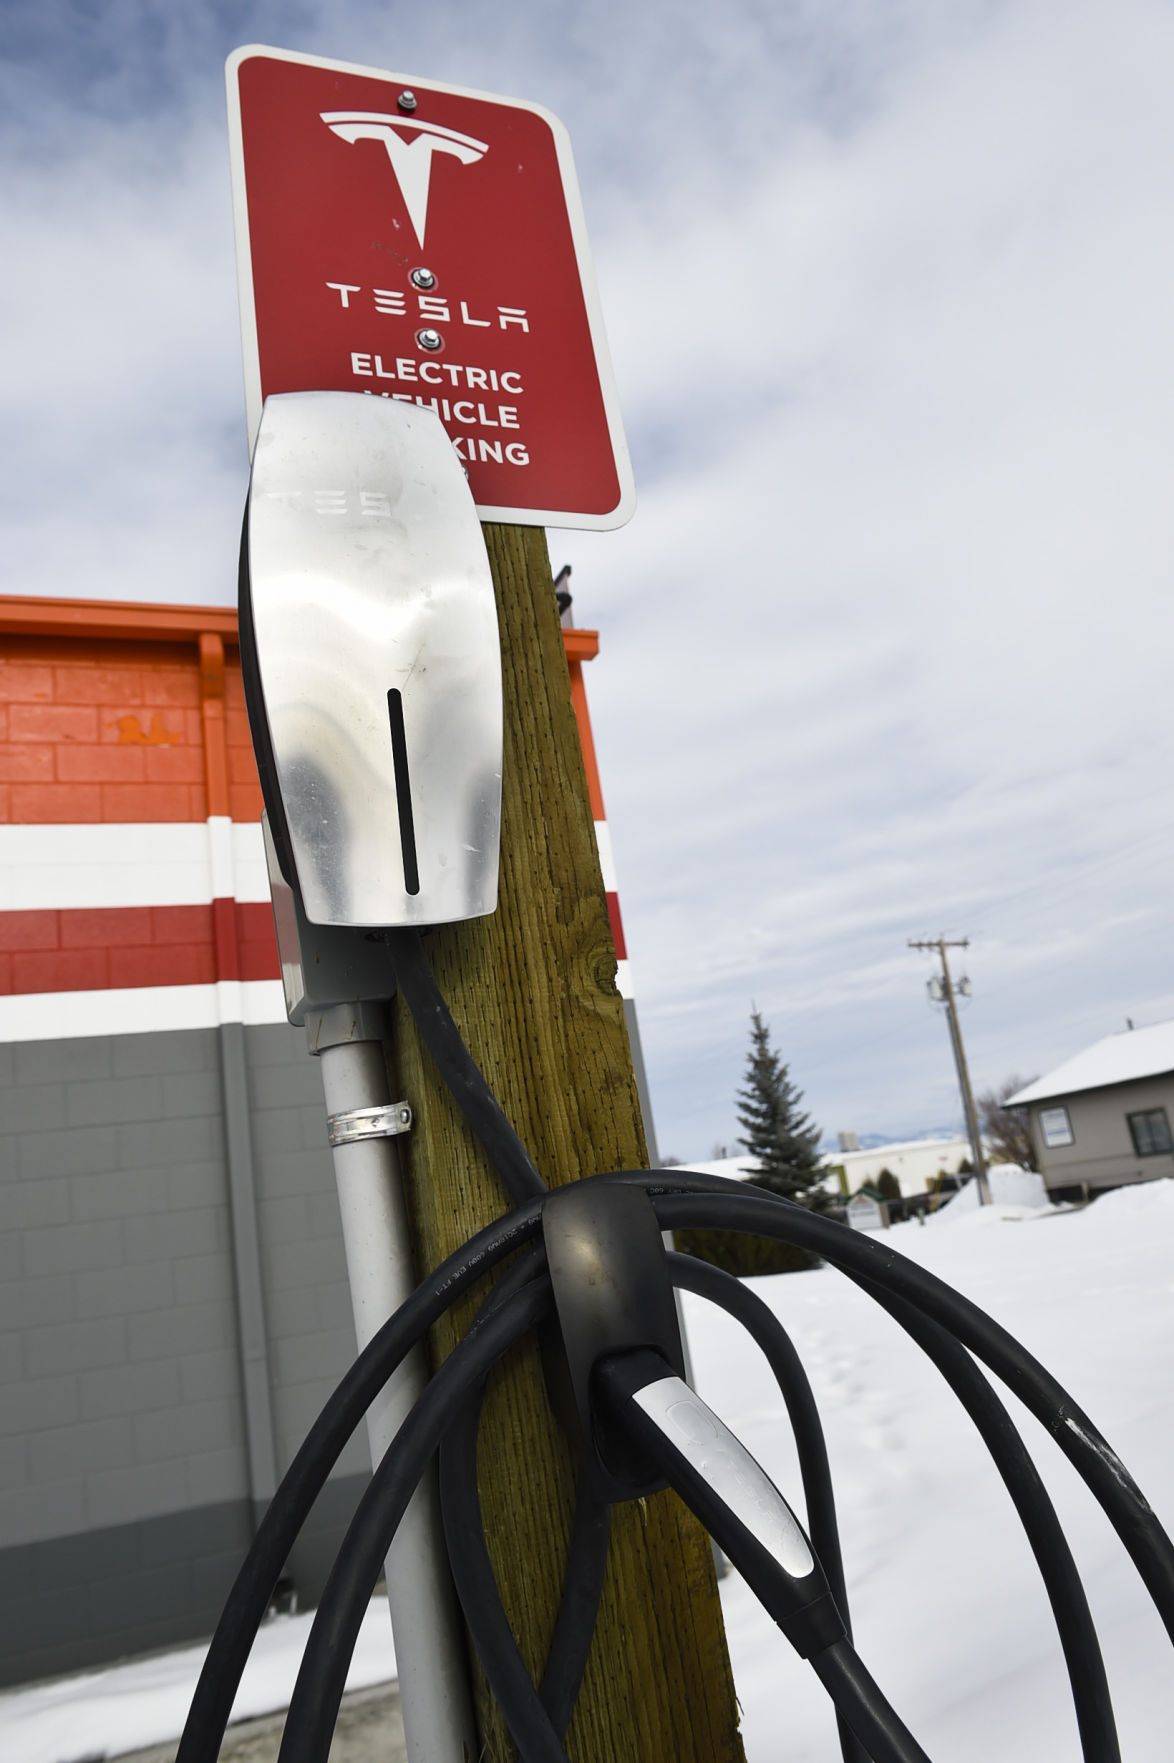 Montana charging stations give electric vehicles room to roam